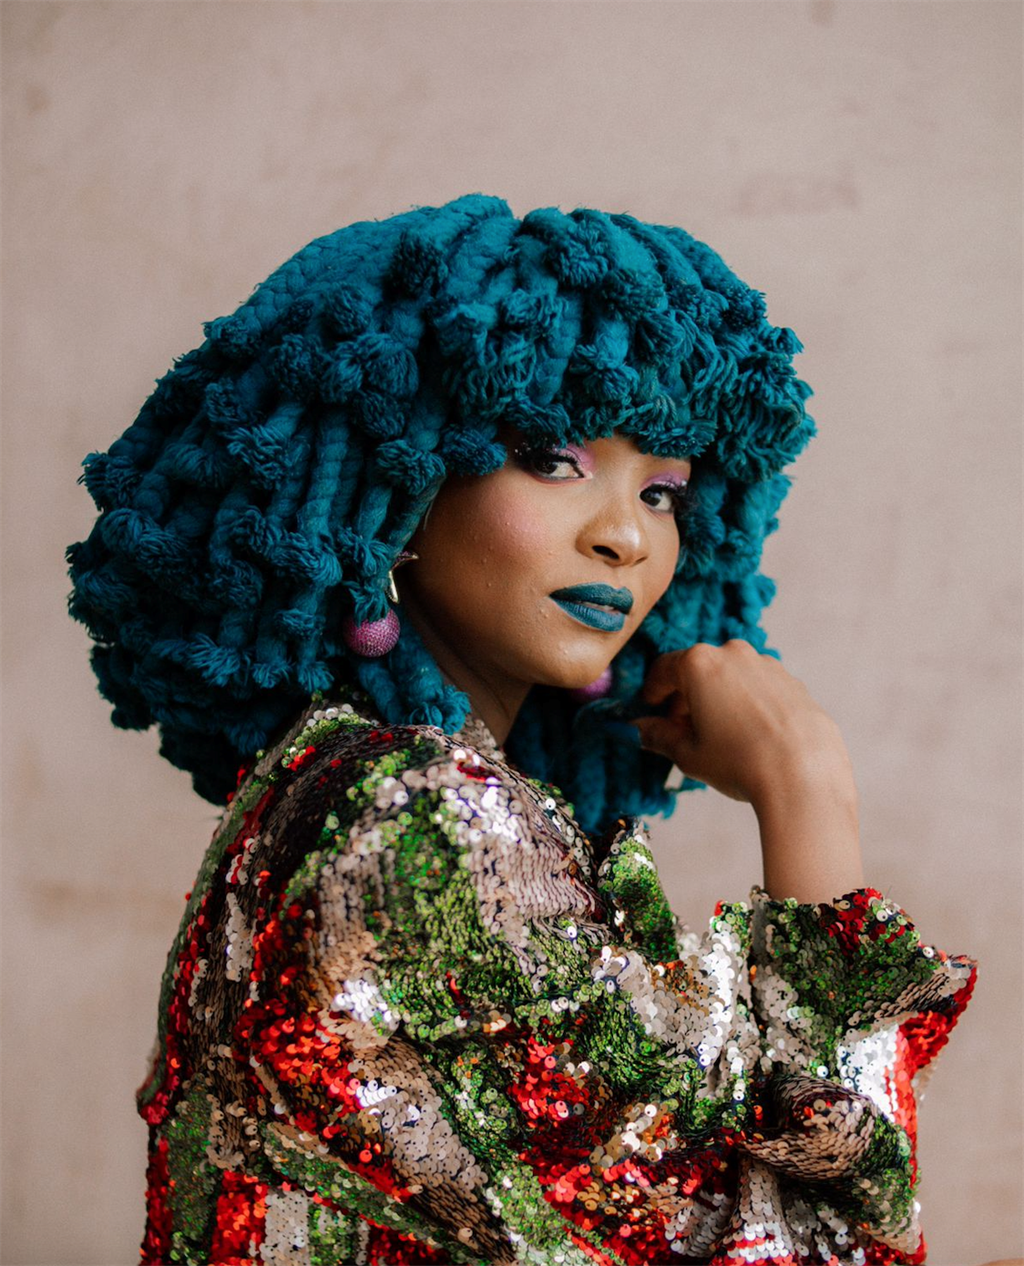 Moonchild Sanelly is back in SA. Photo Supplied